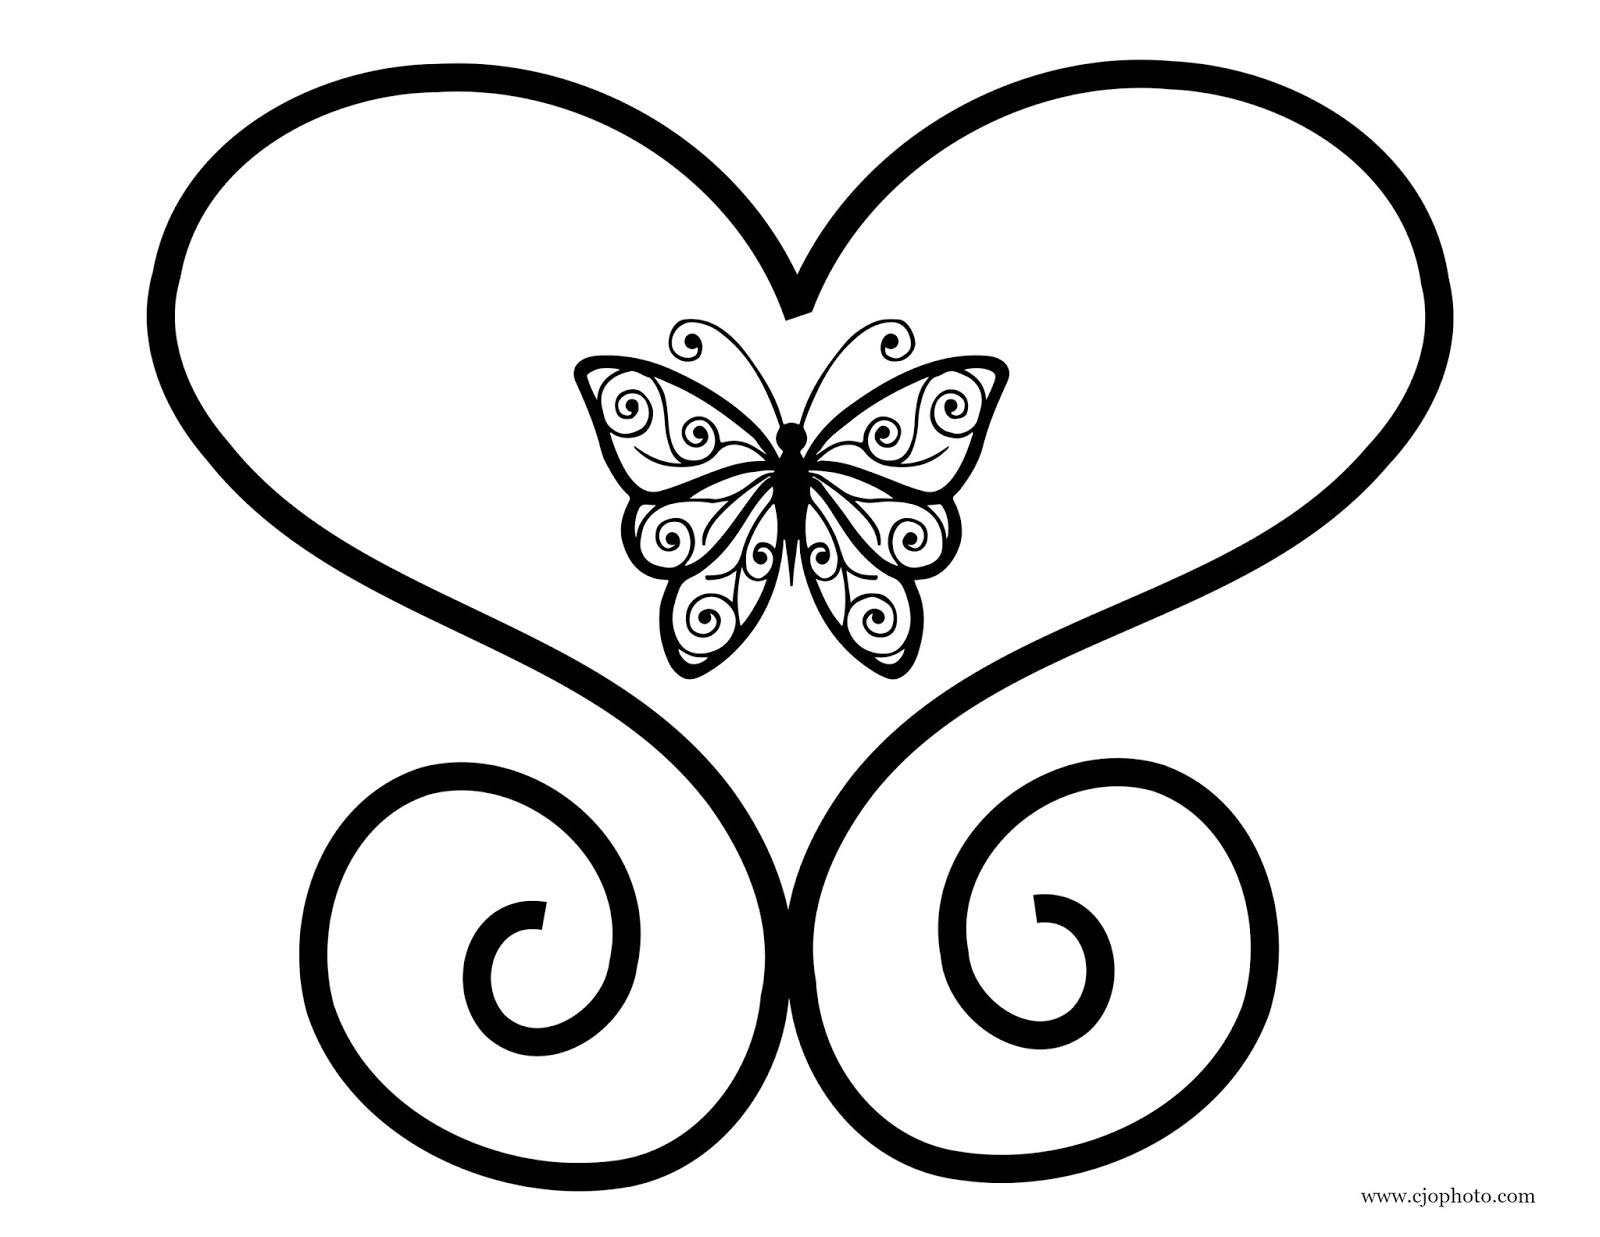 CJO Photo: Butterfly in Heart Coloring Page